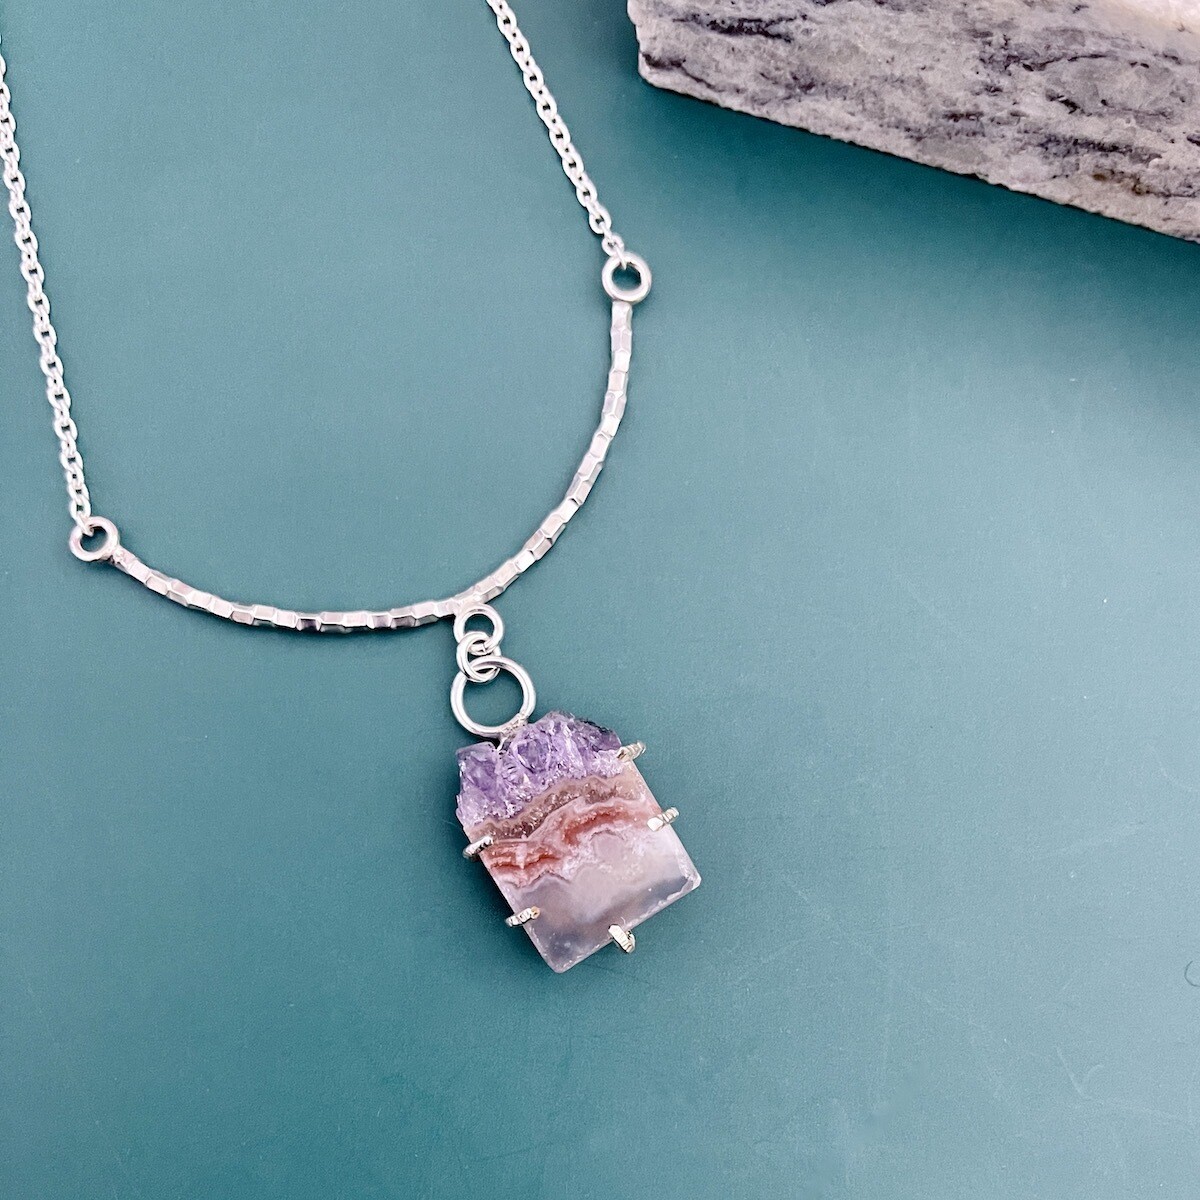 Handmade Necklace with prong set amethyst slice, textured curved bar